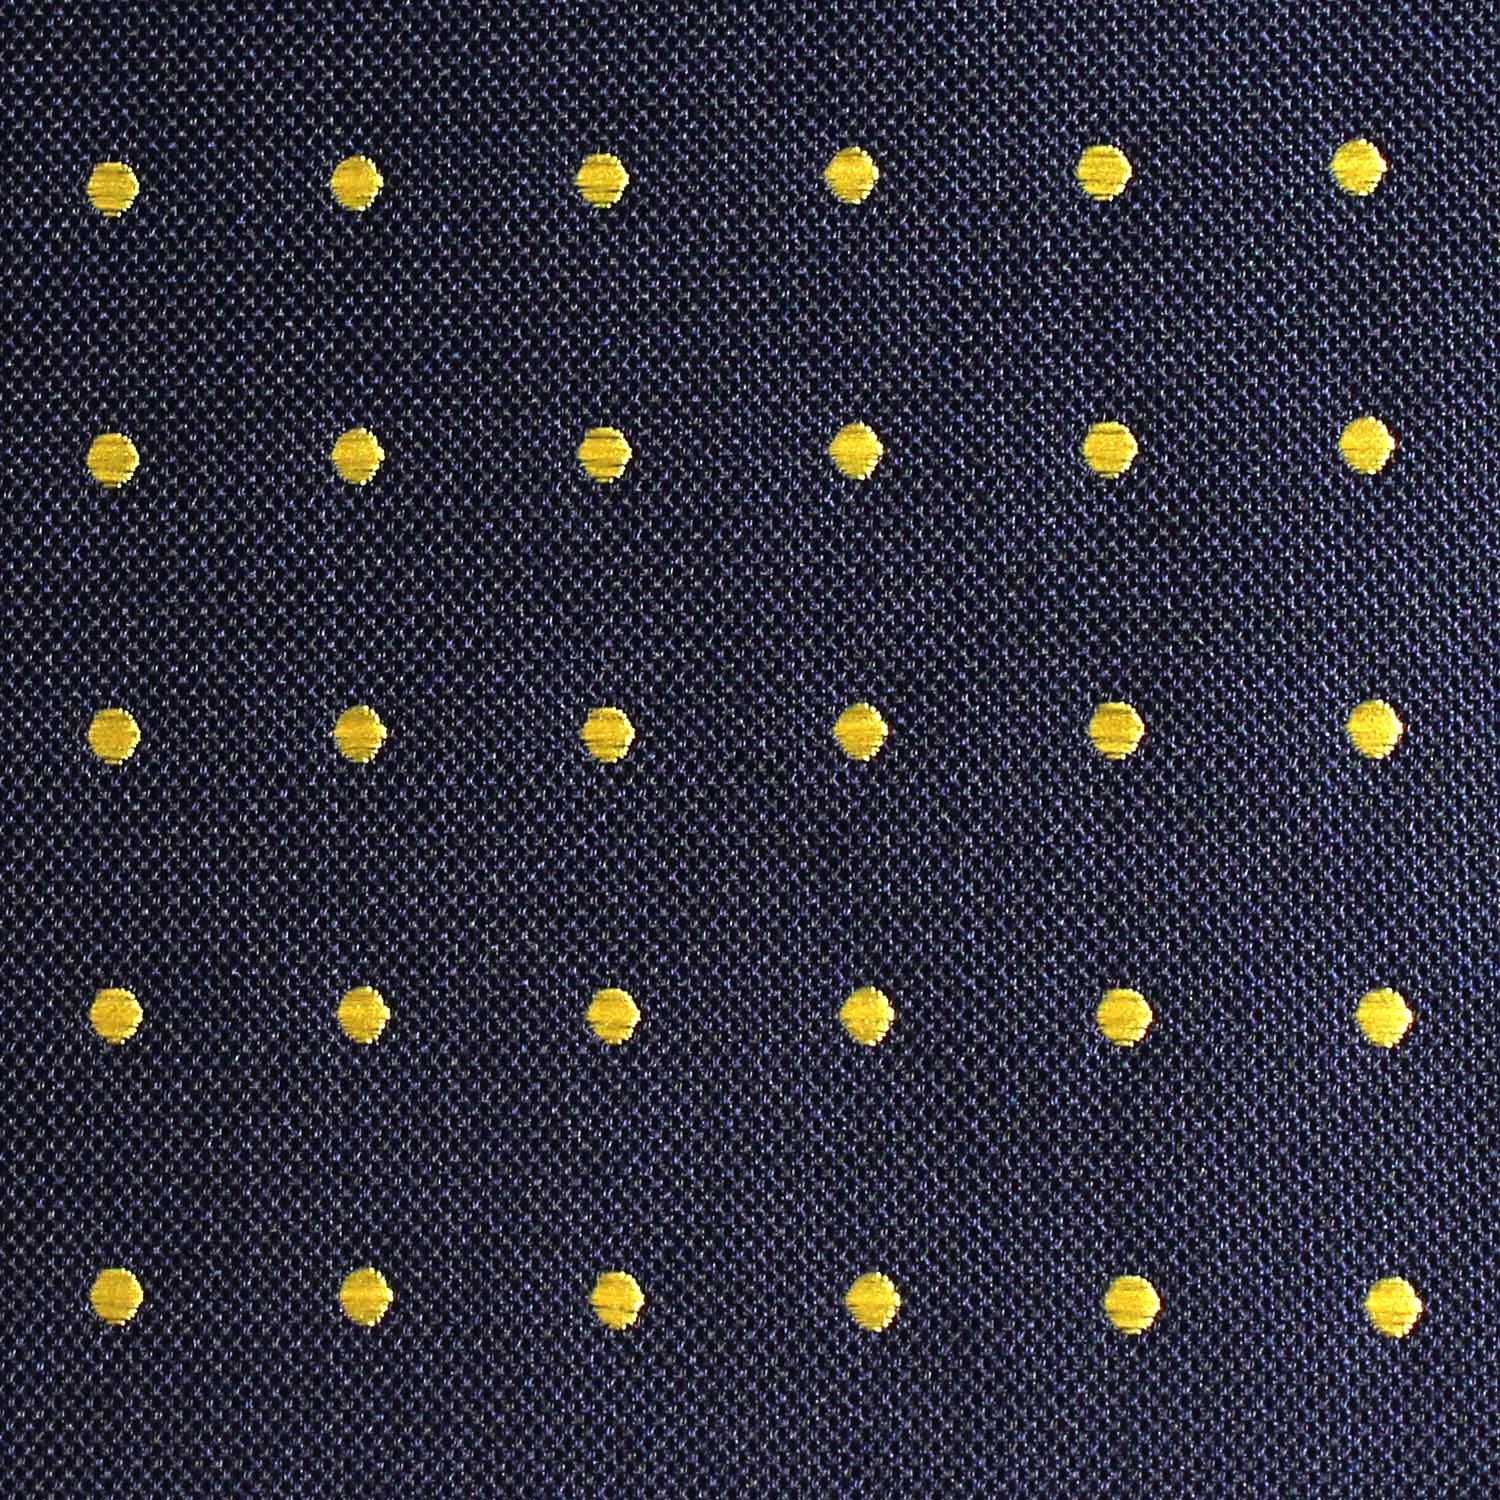 Navy Blue with Yellow Polka Dots Fabric Self Tie Diamond Tip Bow Tie M129